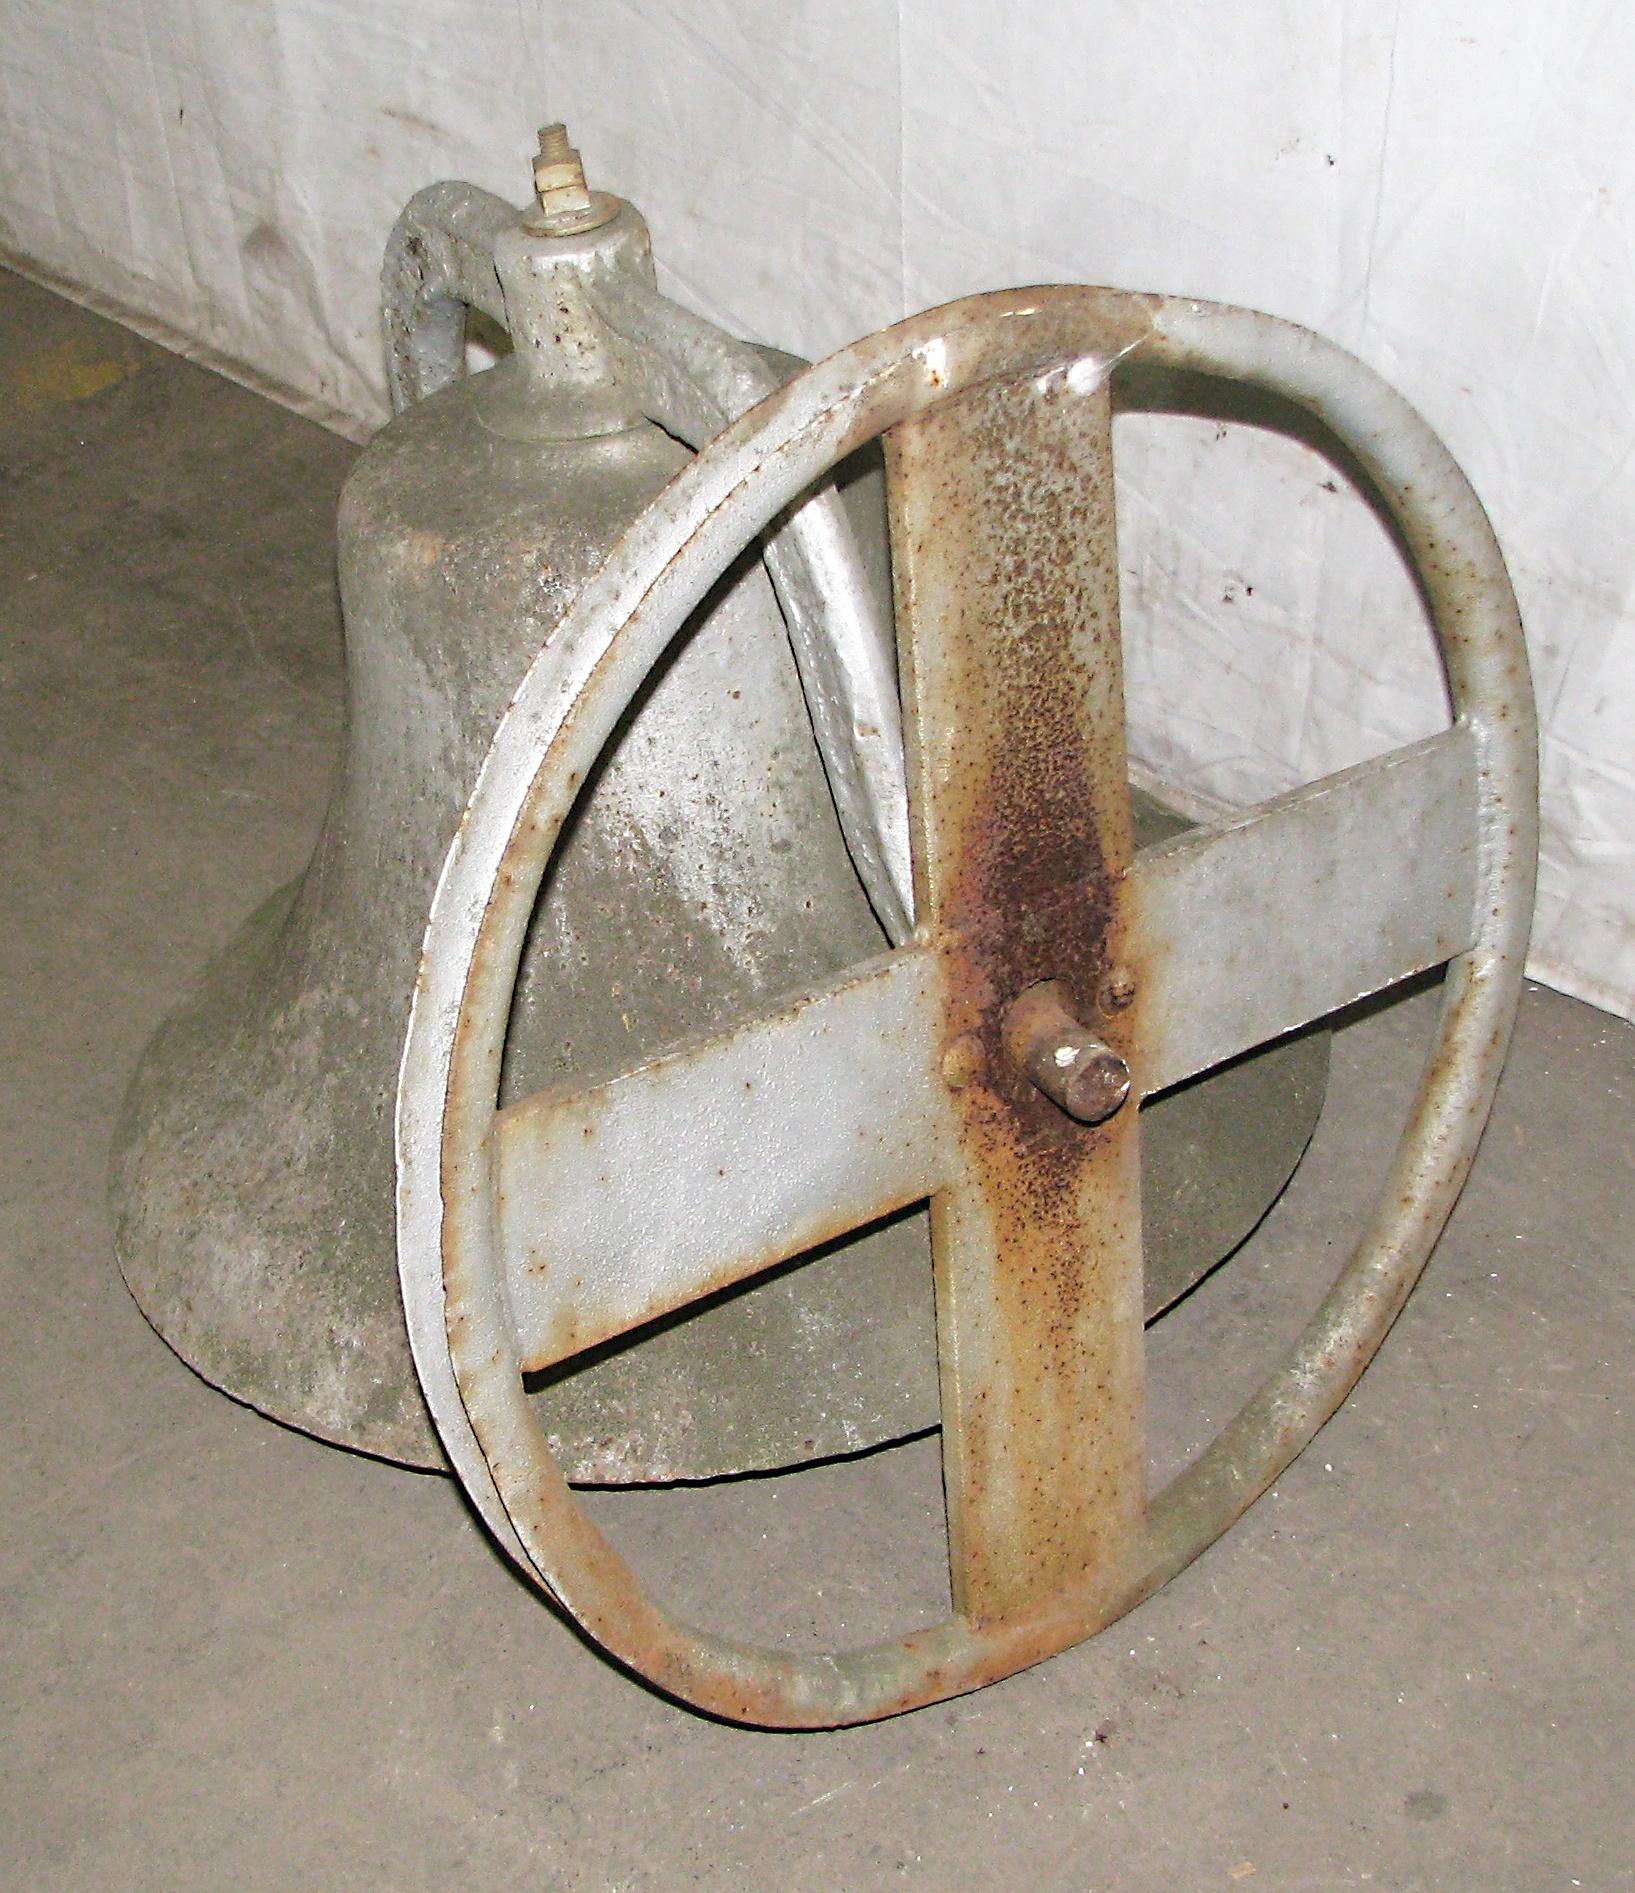 Antique distressed cast iron church bell. The clapper is in need of restoration but still lets off a warm but loud sound. This can be seen at our 400 Gilligan St location in Scranton, PA. Measures: 22 in. Diameter.